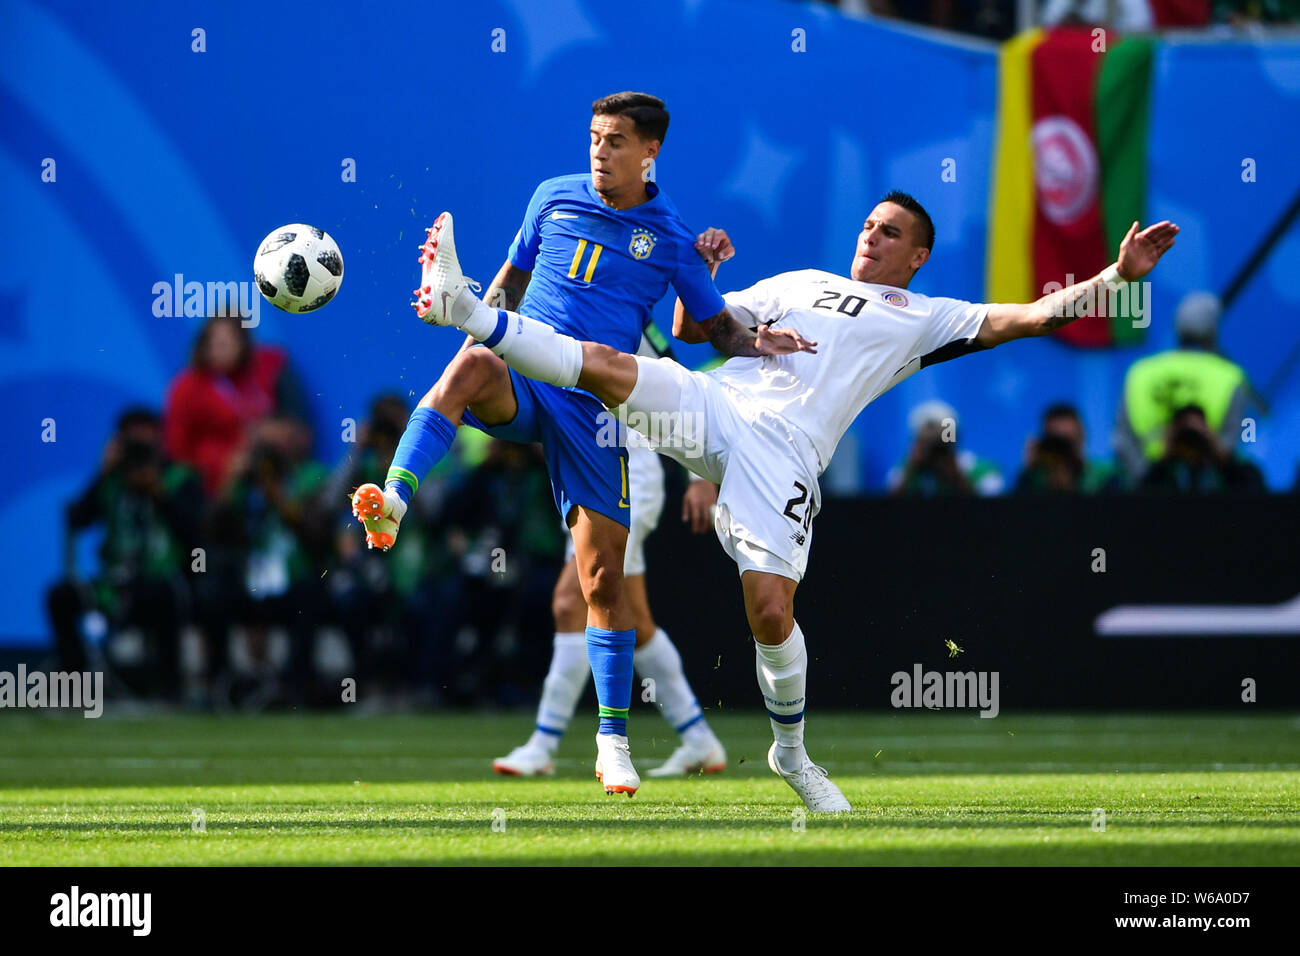 David Guzman, right, of Costa Rica kicks the ball to make a pass against Philippe Coutinho of Brazil in their Group E match during the FIFA World Cup Stock Photo